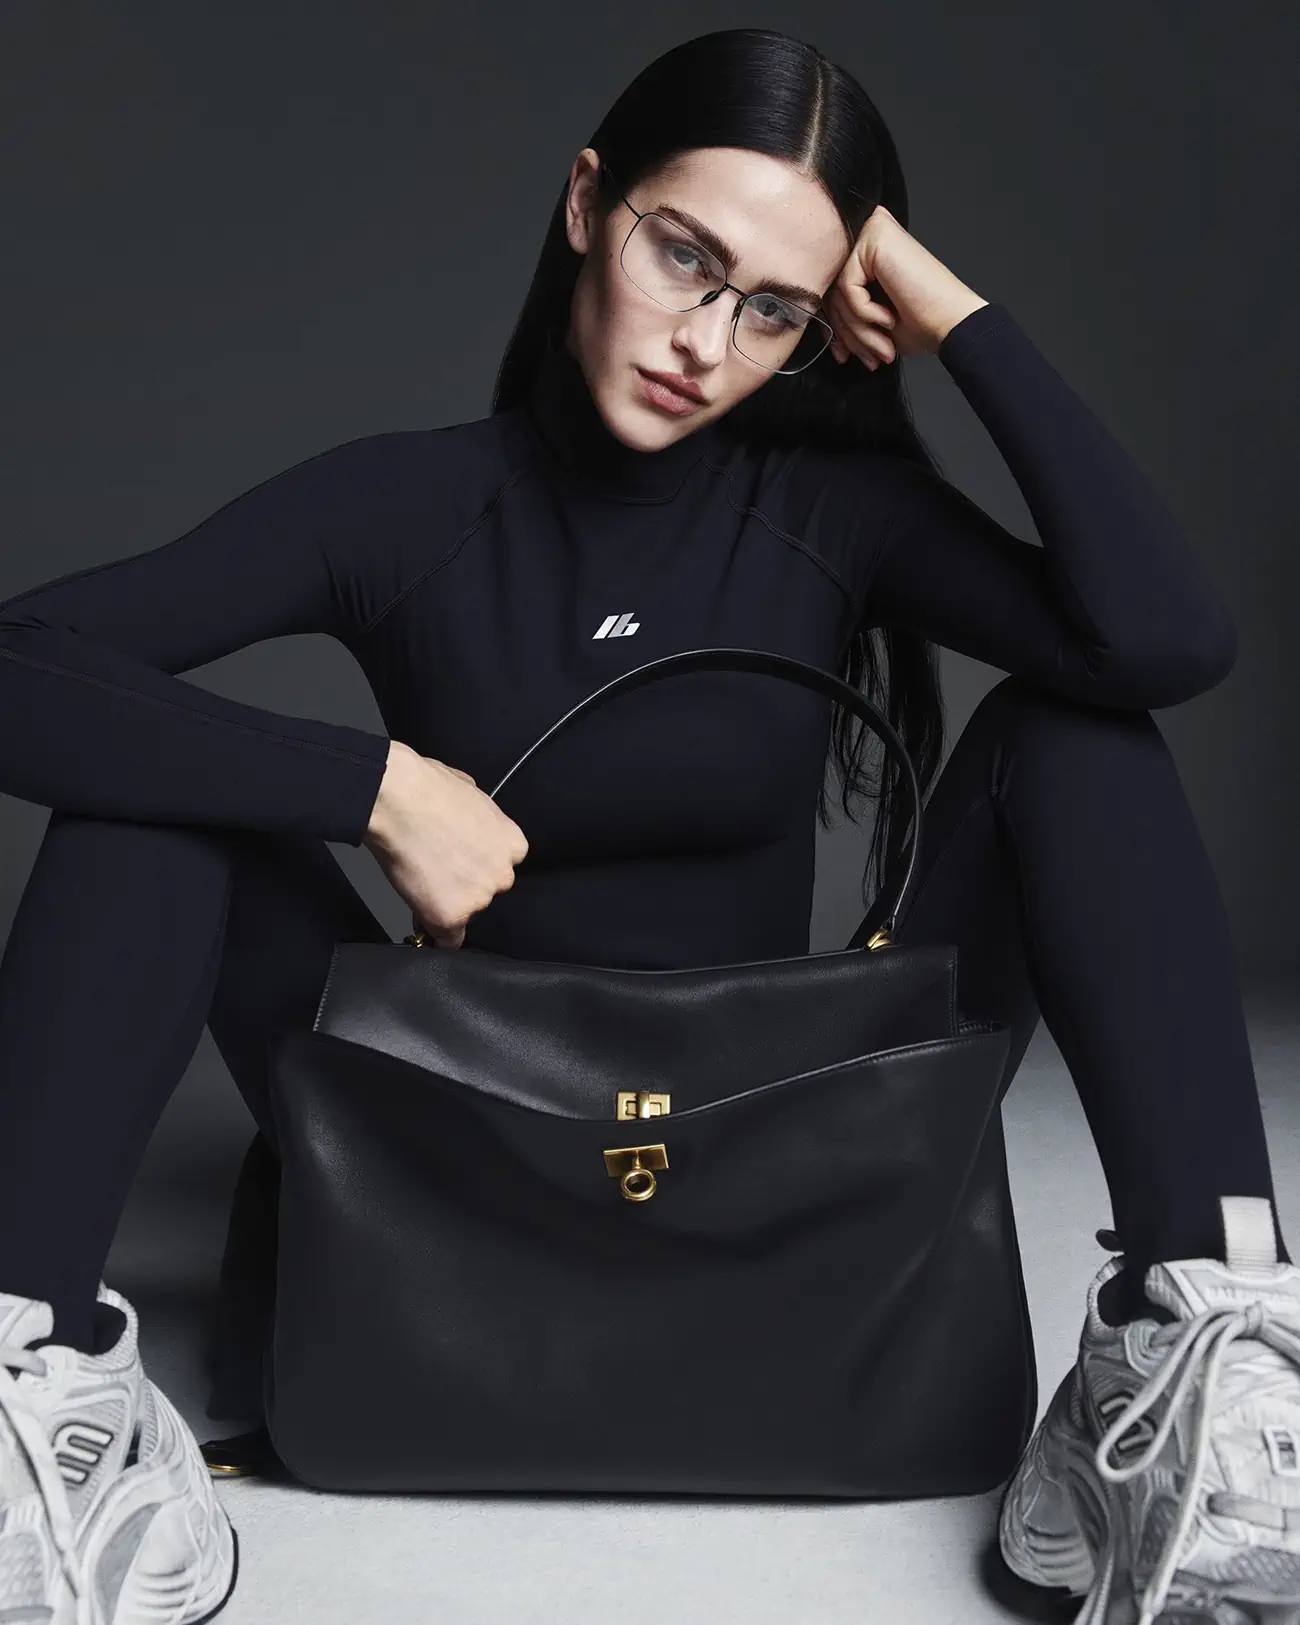 Balenciaga Rodeo Bag gets centered in new campaign